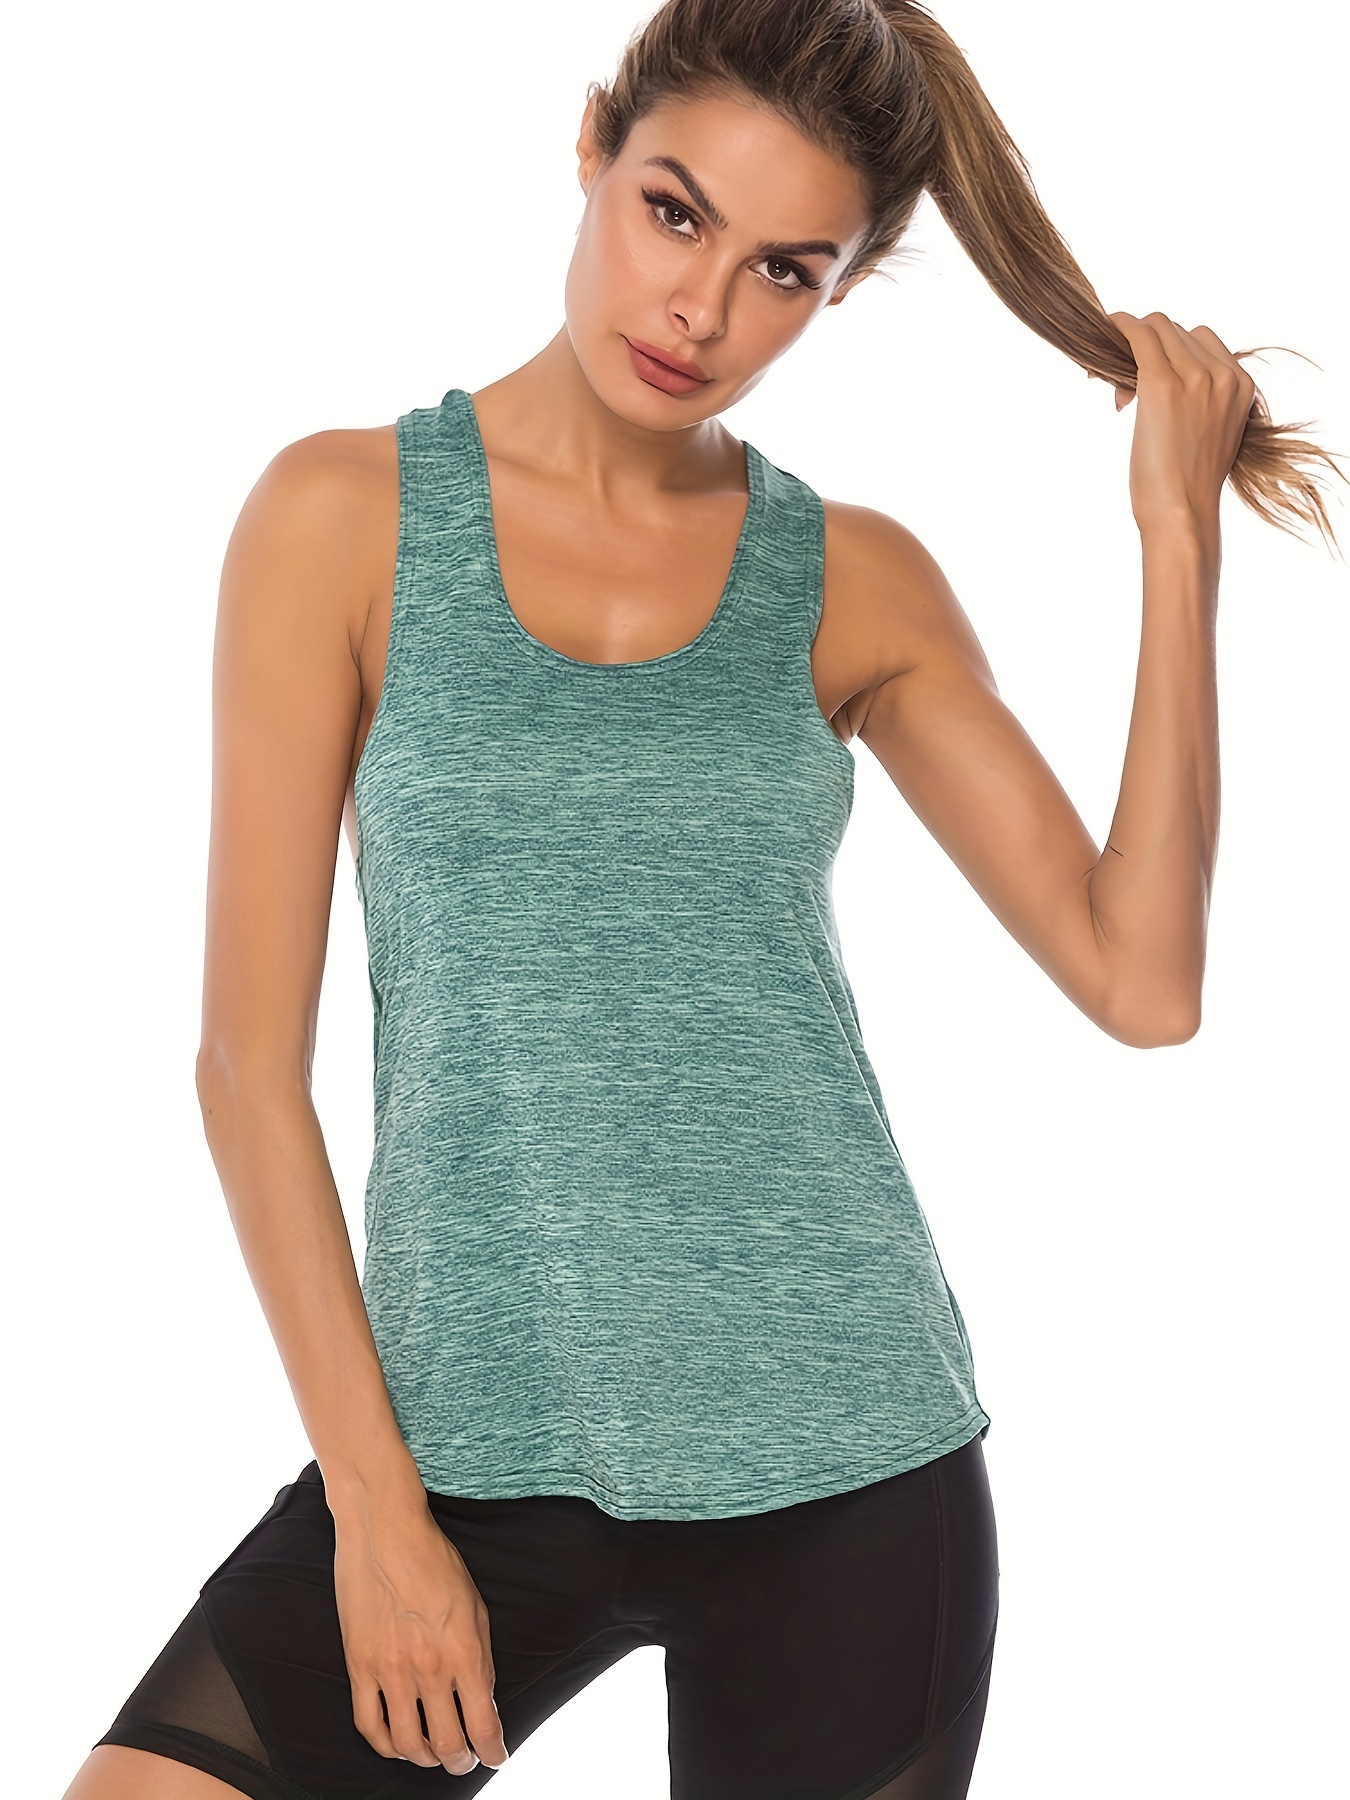 Spencer Women's Workout Tank Tops Casual Sleeveless Racerback Athletic Yoga  Tops Quick Dry Sport Shirts for Gym Exercise (M, Green)